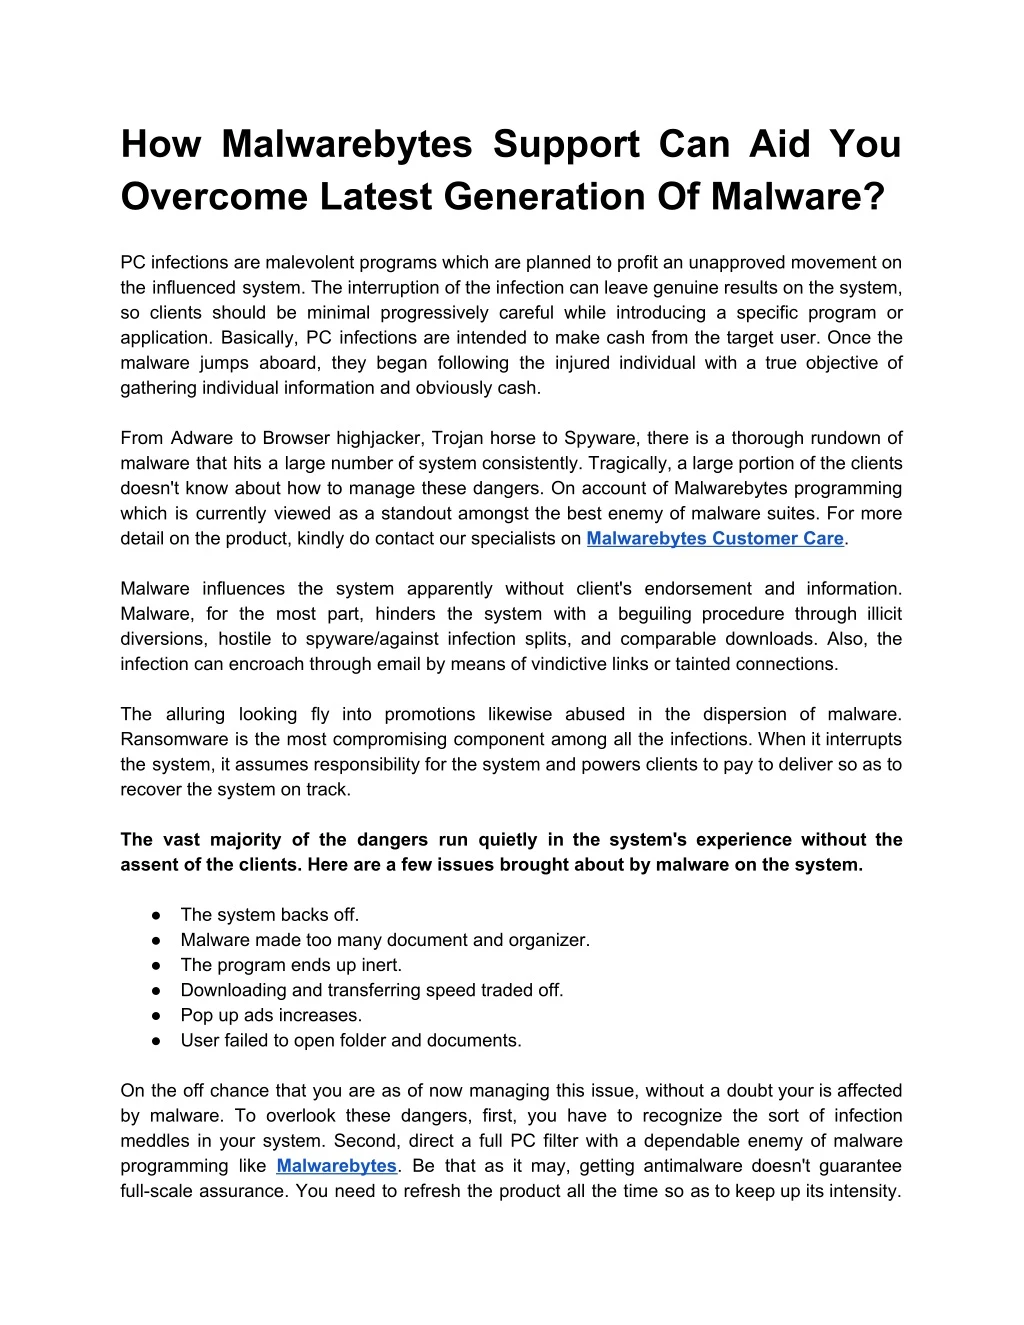 how malwarebytes support can aid you overcome